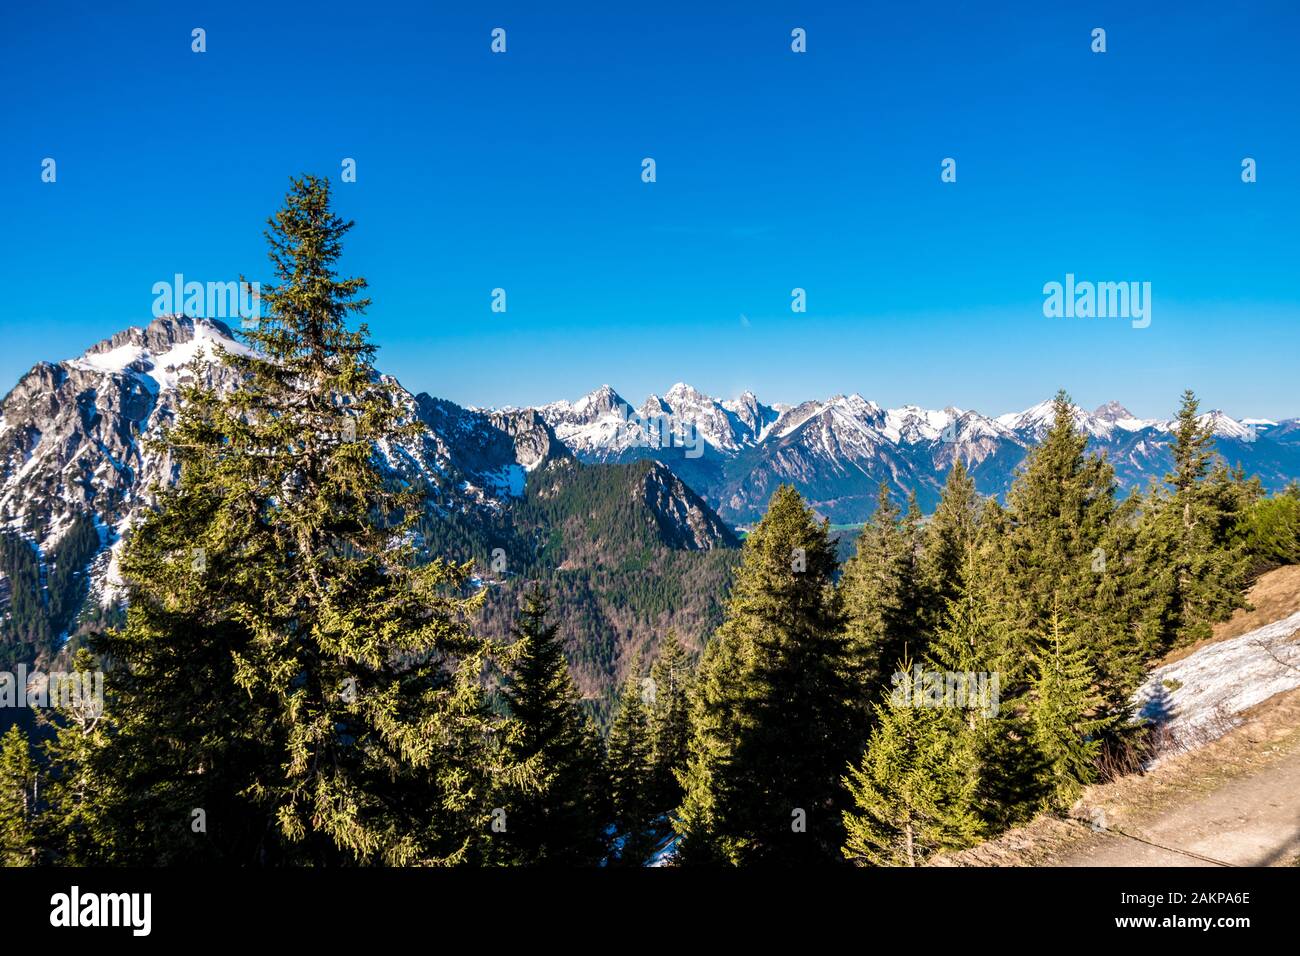 Beautiful view of the mountains with snow and trees Stock Photo